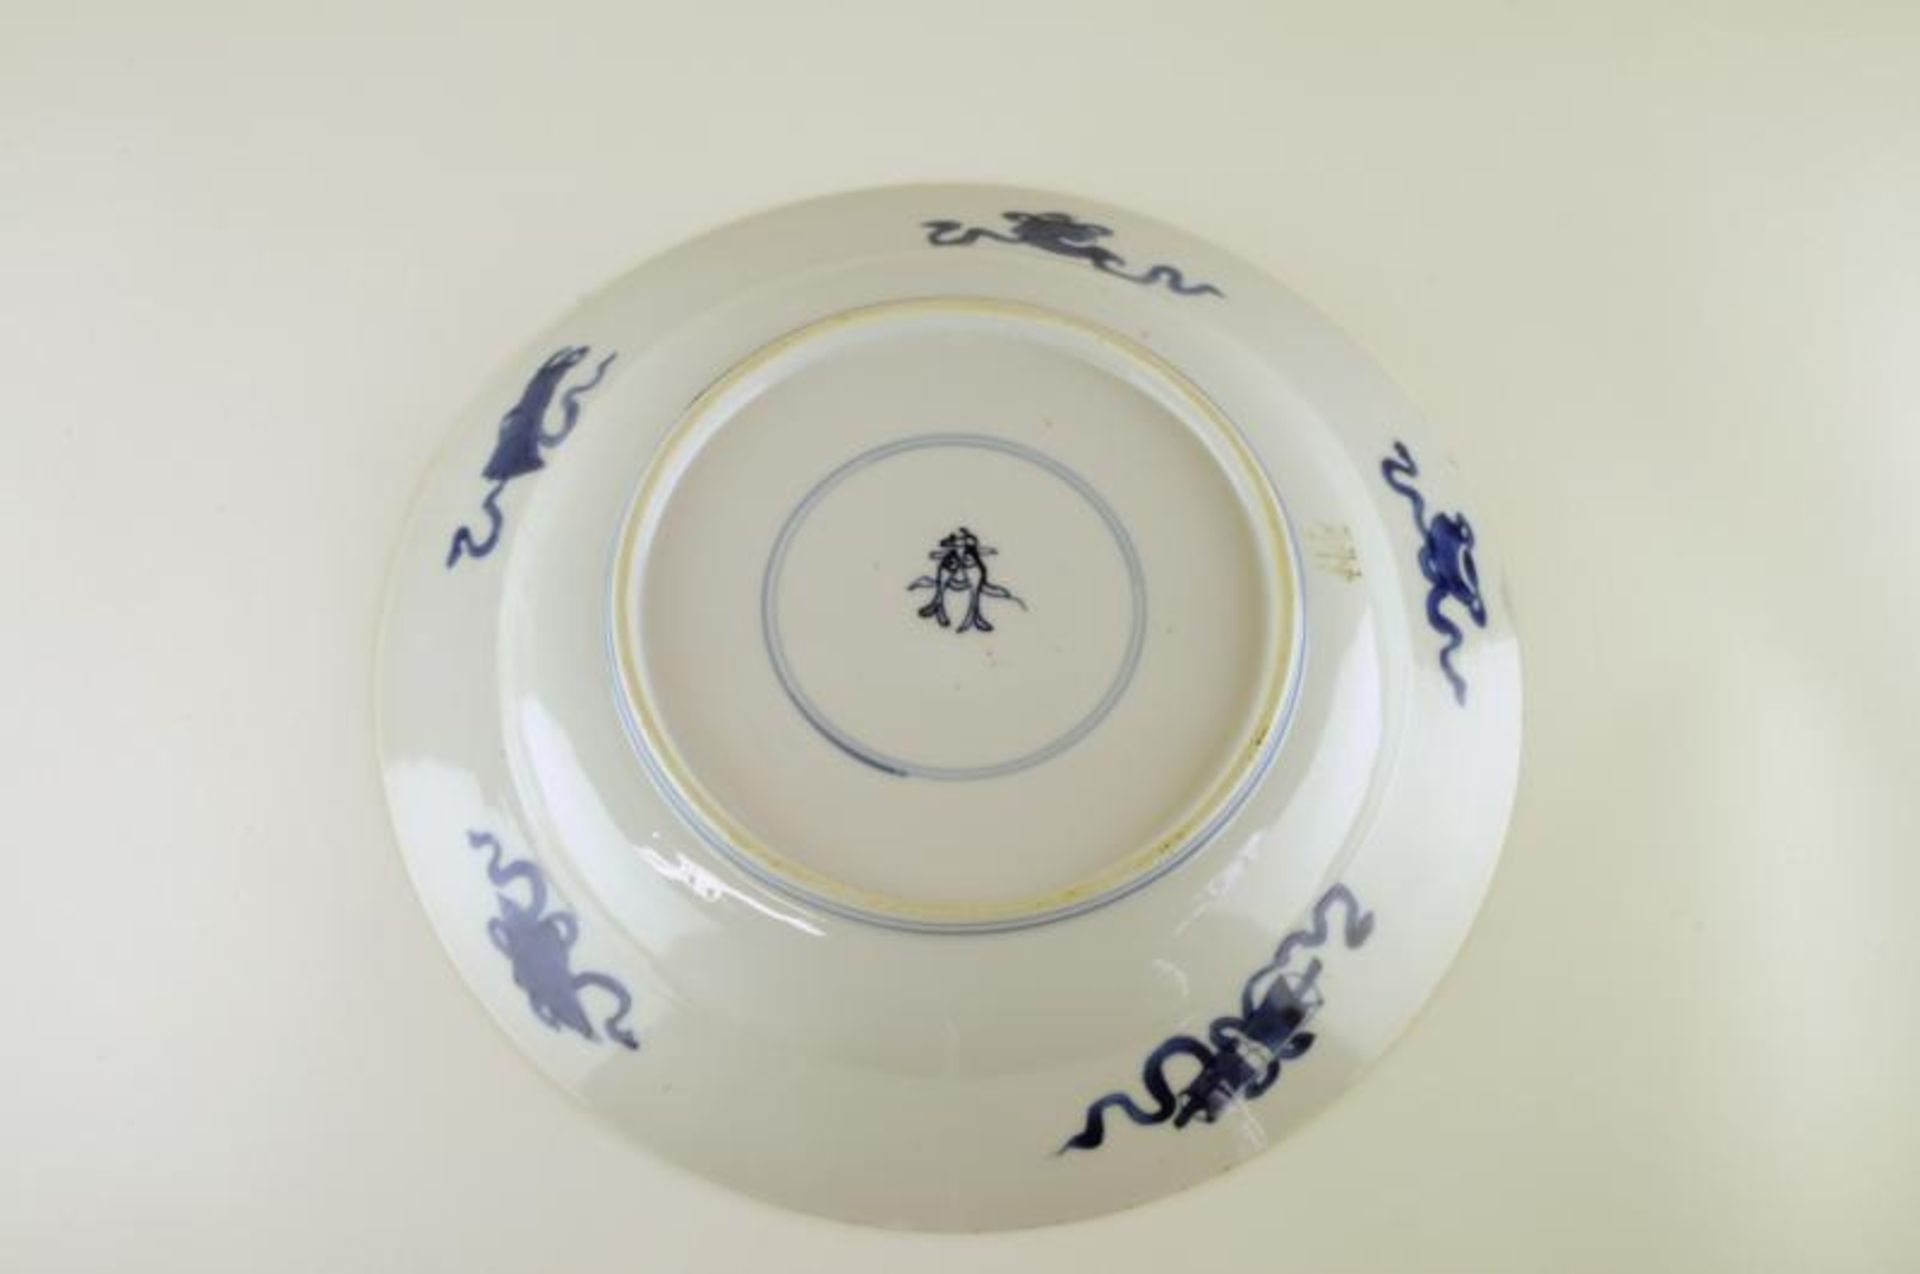 A Chinese Kangxi marriage plate painted with a dragon and a carp leaping from the waves, within a - Image 3 of 4